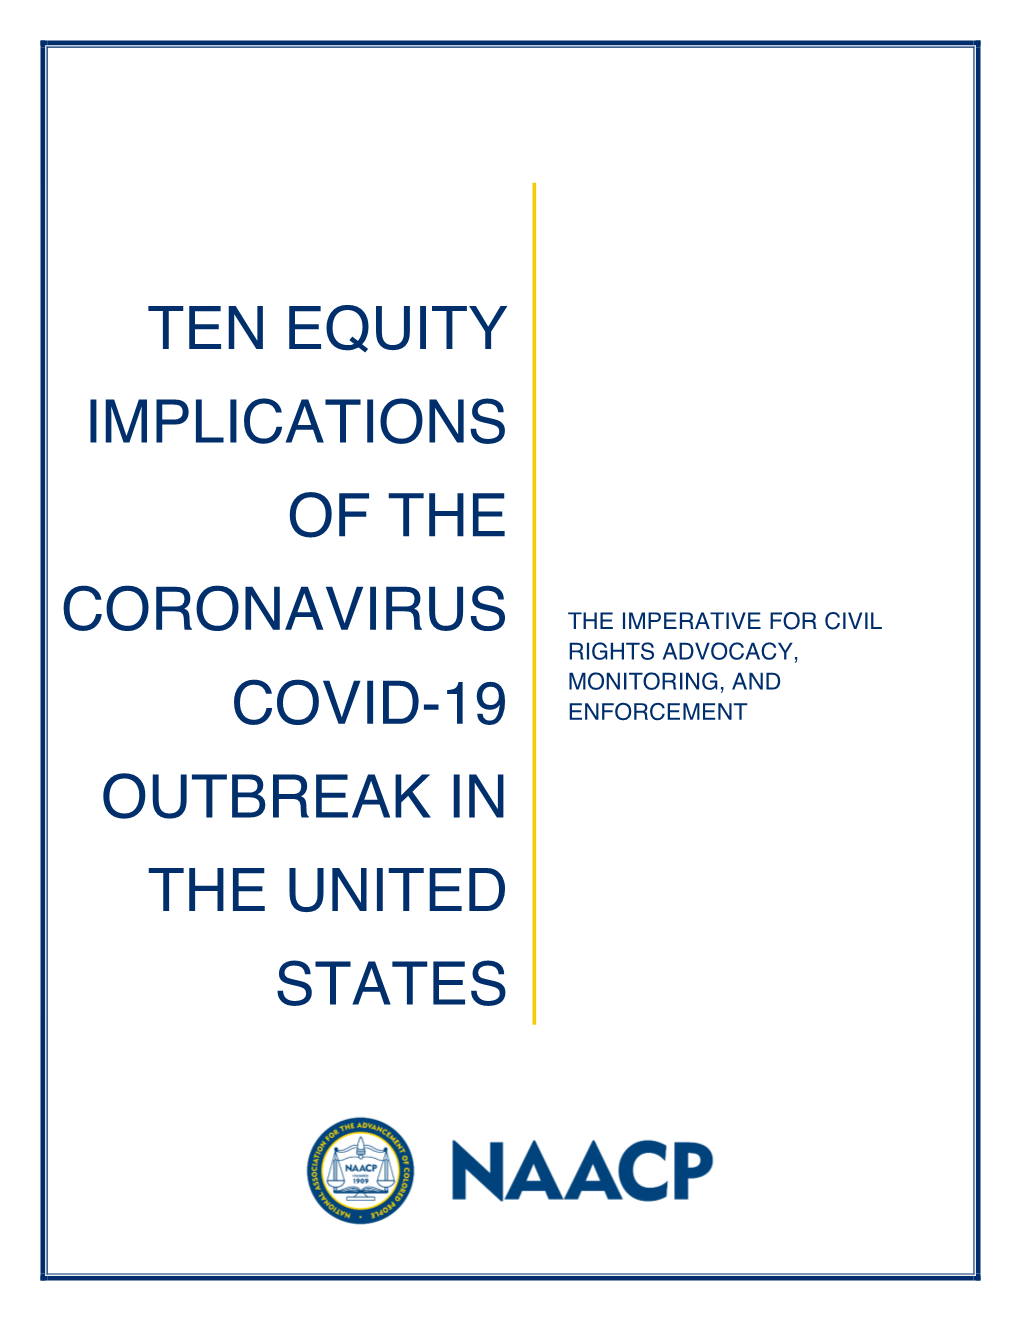 Ten Equity Implications of the Coronavirus COVID-19 Outbreak in the United States the Imperative for Civil Rights Advocacy, Monitoring, and Enforcement